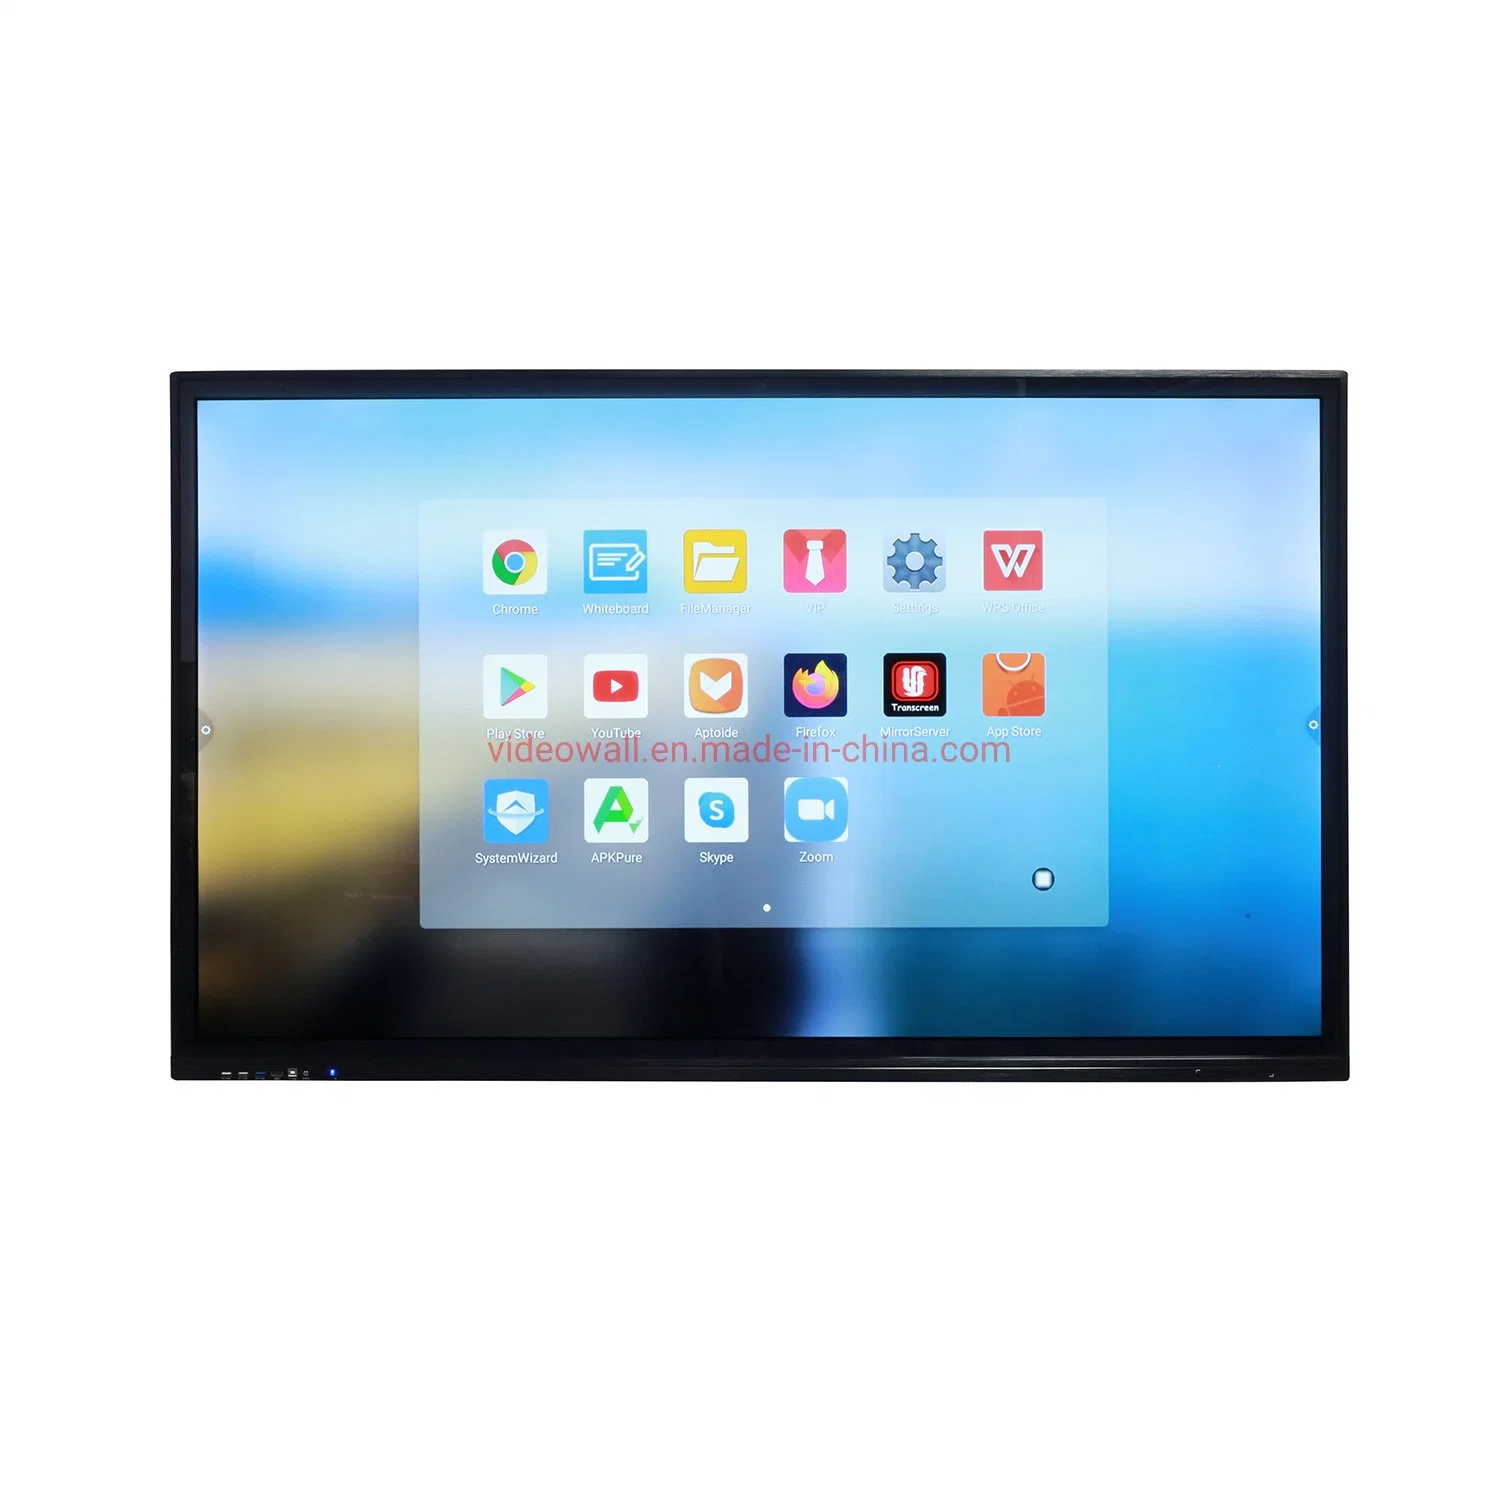 4K ir Touch LCD displays Classroom wireless screen share interactive smart board 75inch 65inch